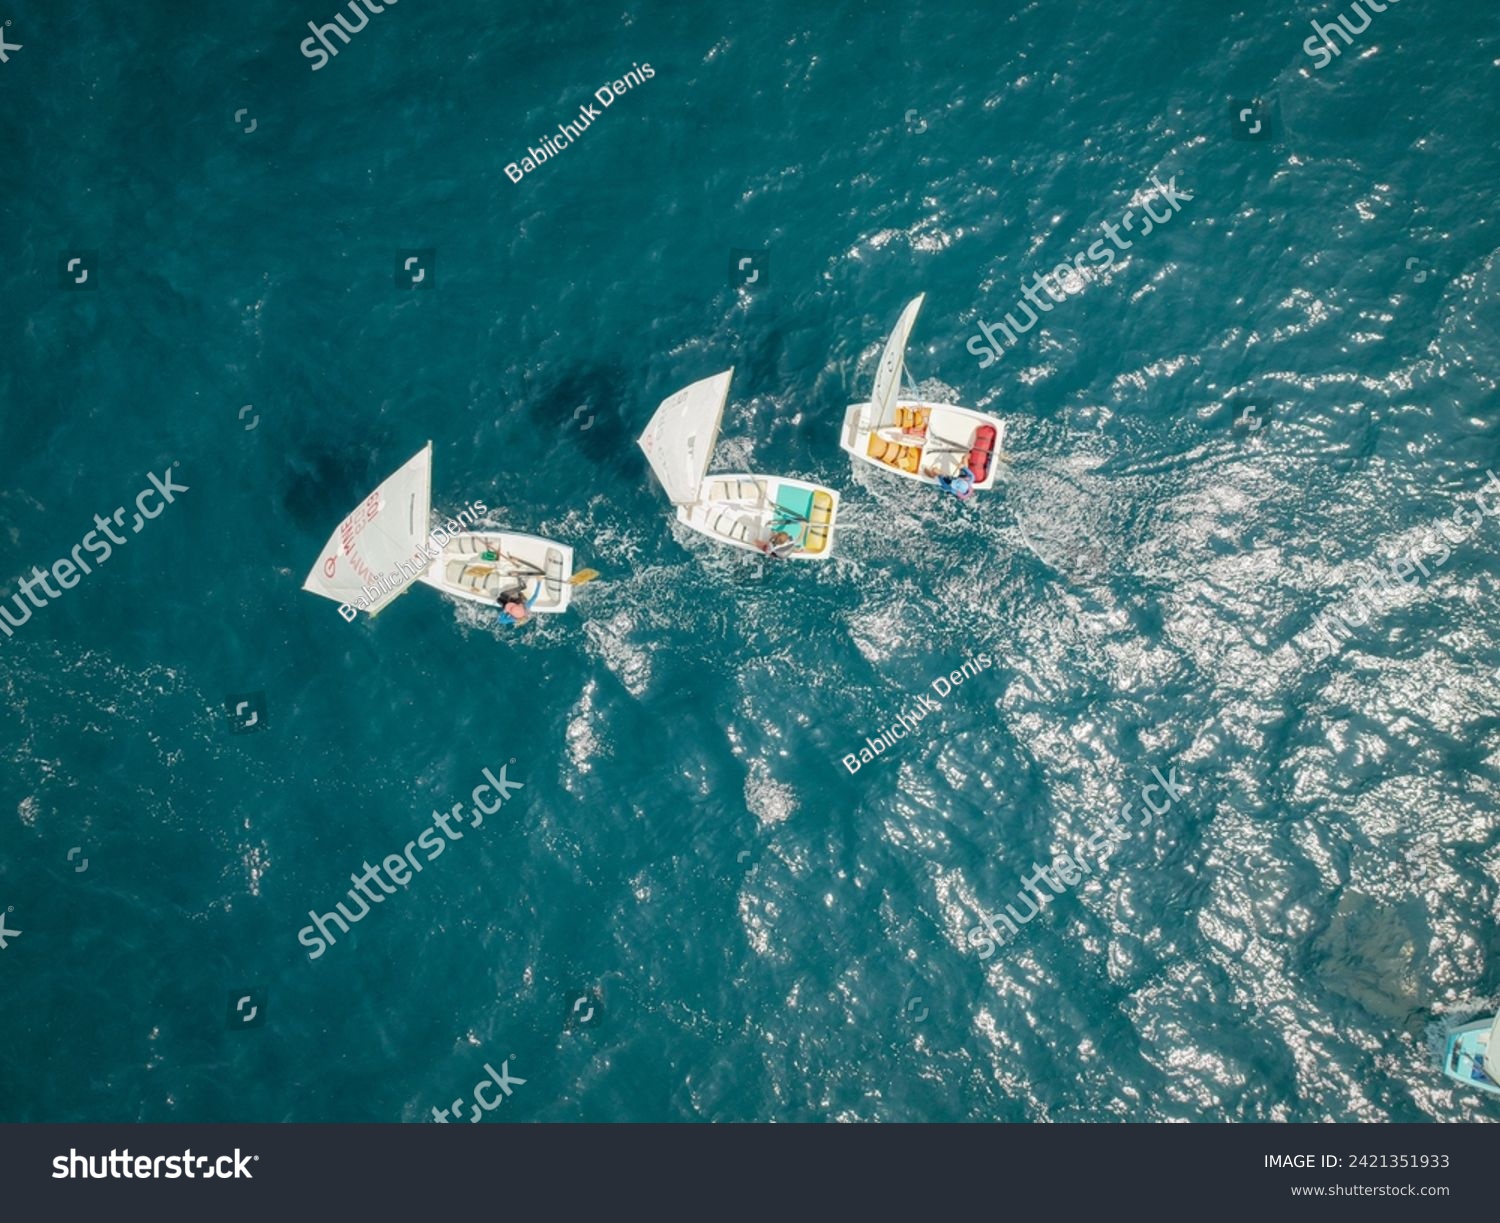 Aerial View of Small Sailboats Racing on Sea #2421351933